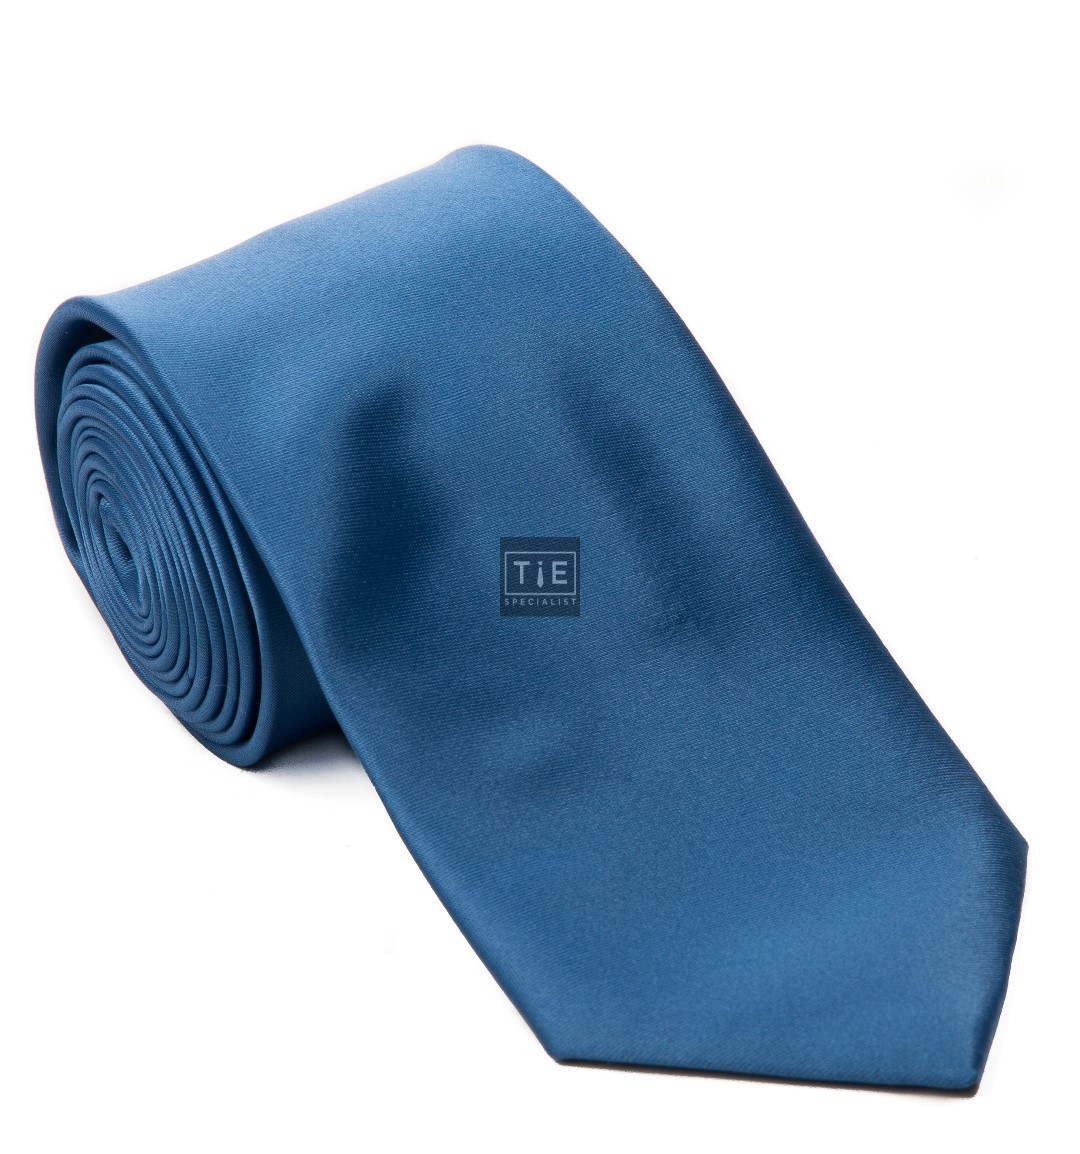 Blue Satin Tie with Matching Pocket Square